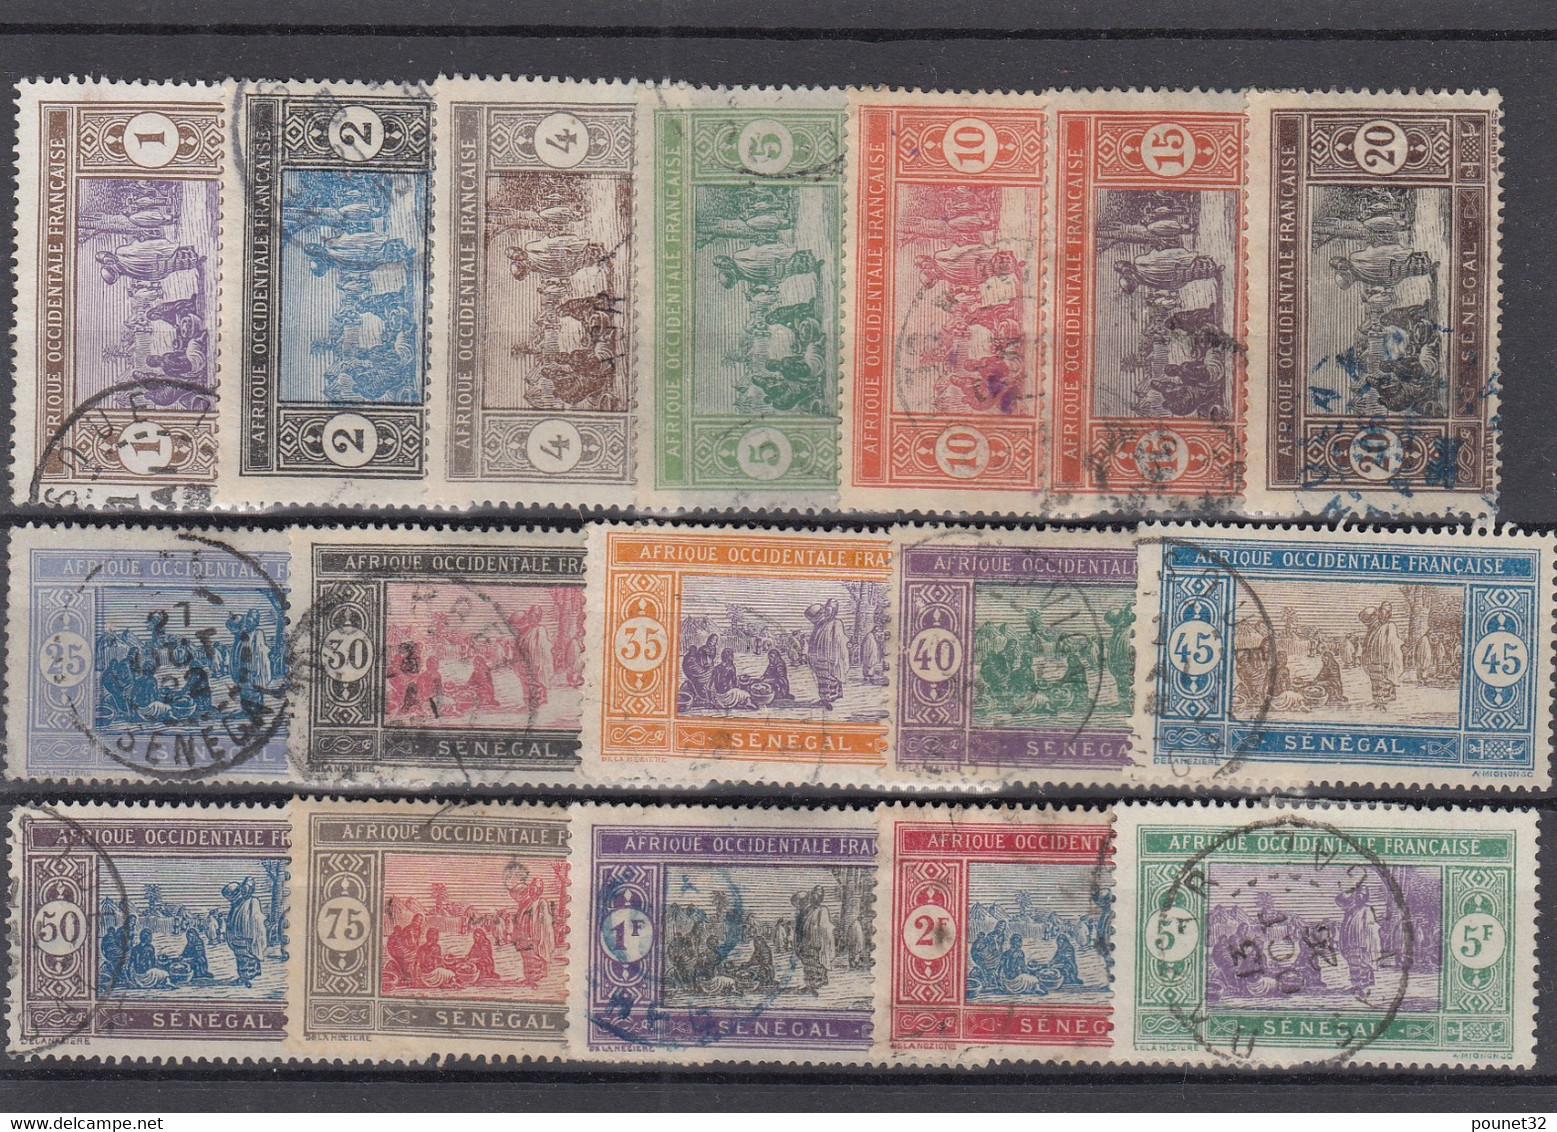 SENEGAL : SERIE COMPLETE N° 53/69 OBLITERATIONS LEGERES - Used Stamps